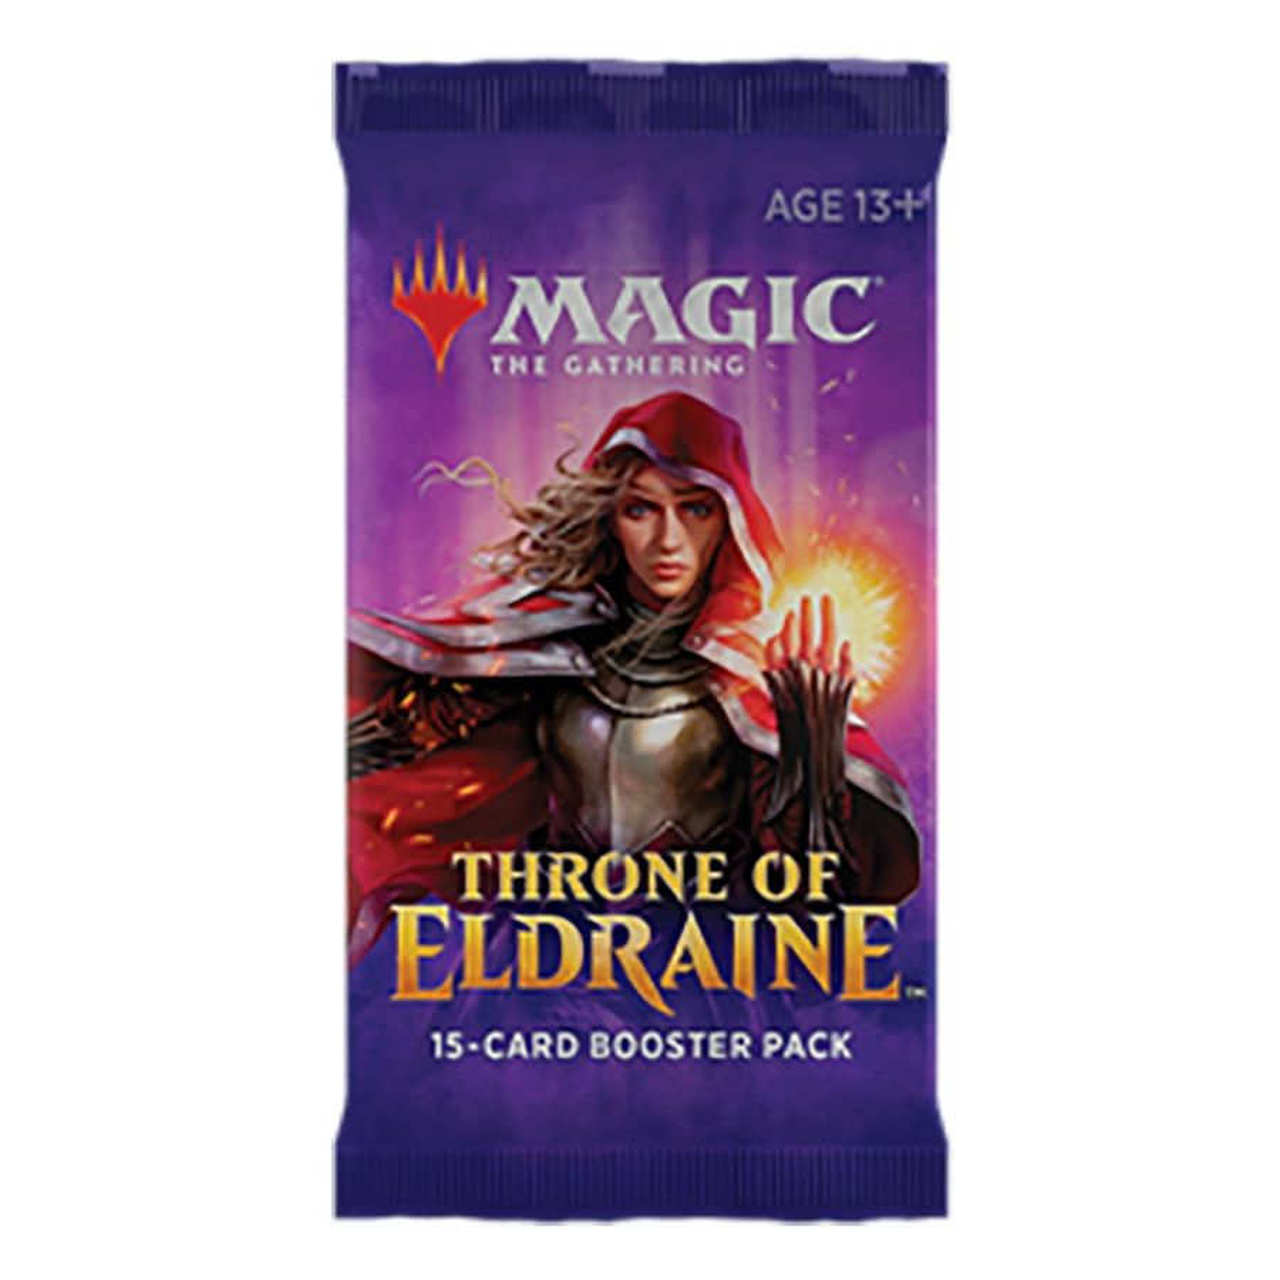 MAGIC THE GATHERING (MTG): Throne of Eldraine Booster Pack